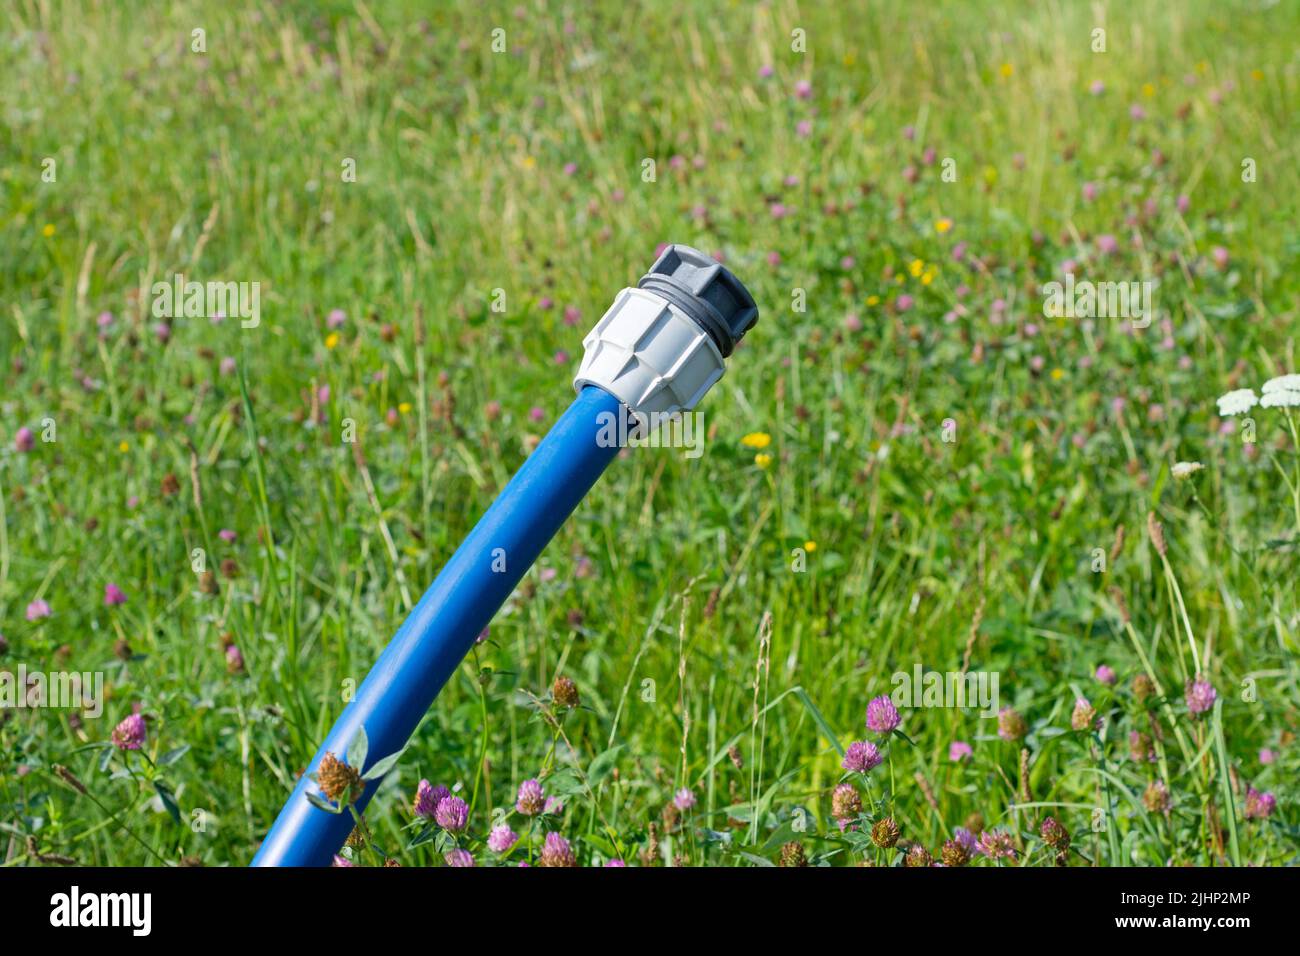 Domestic water connection from drinking water pipe on building land Stock Photo